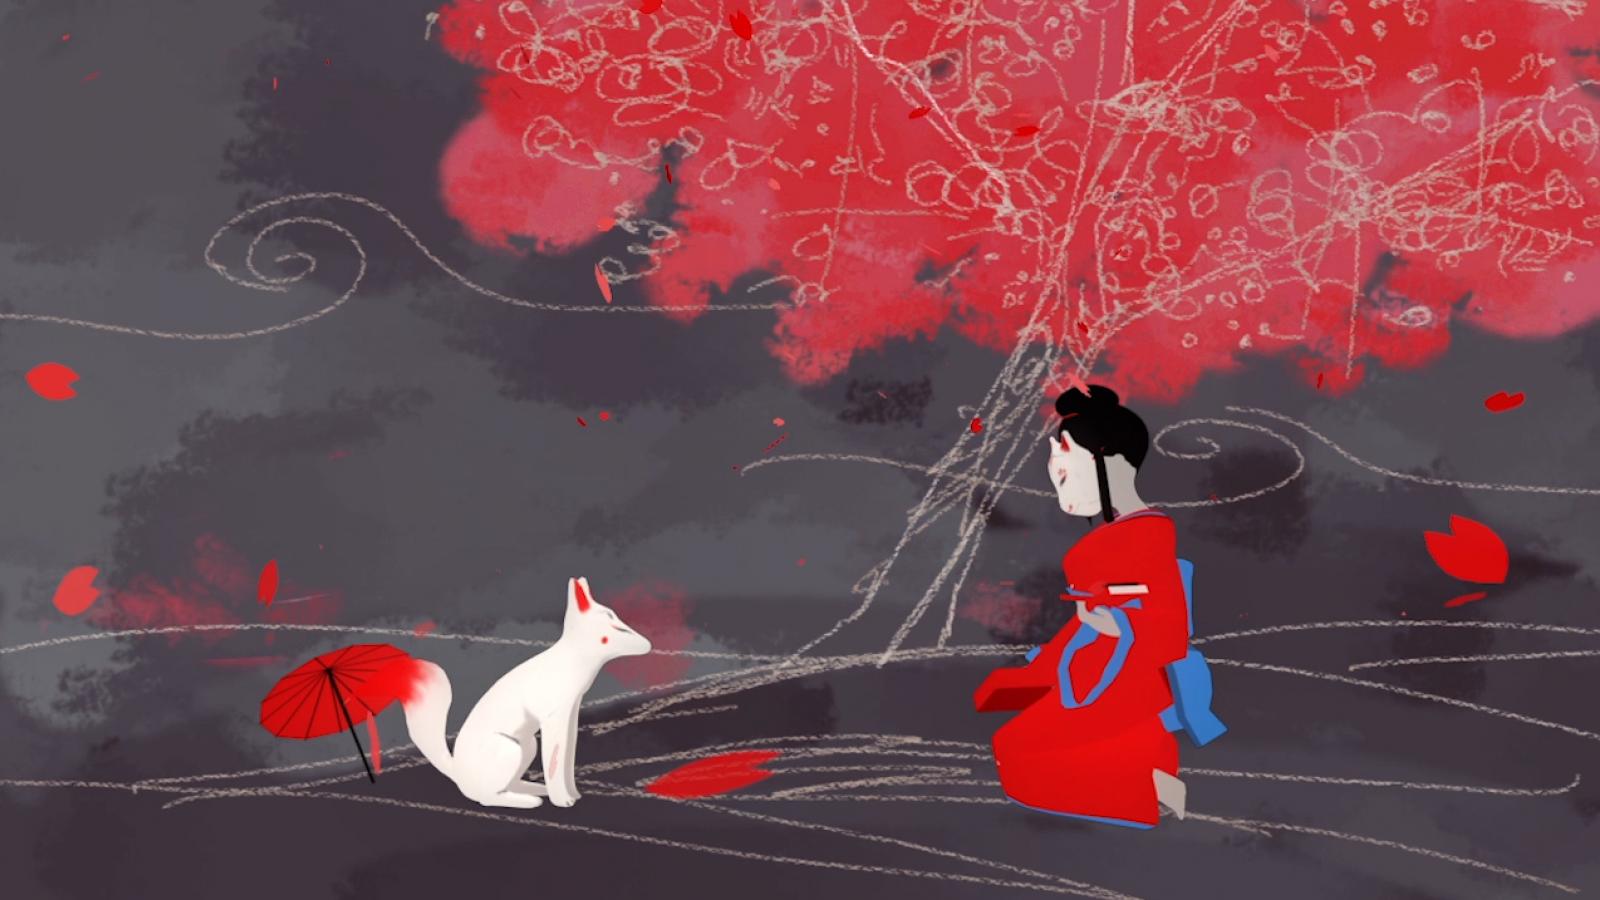 Still from Kitsune Fire animation by Shumeng Zhao.